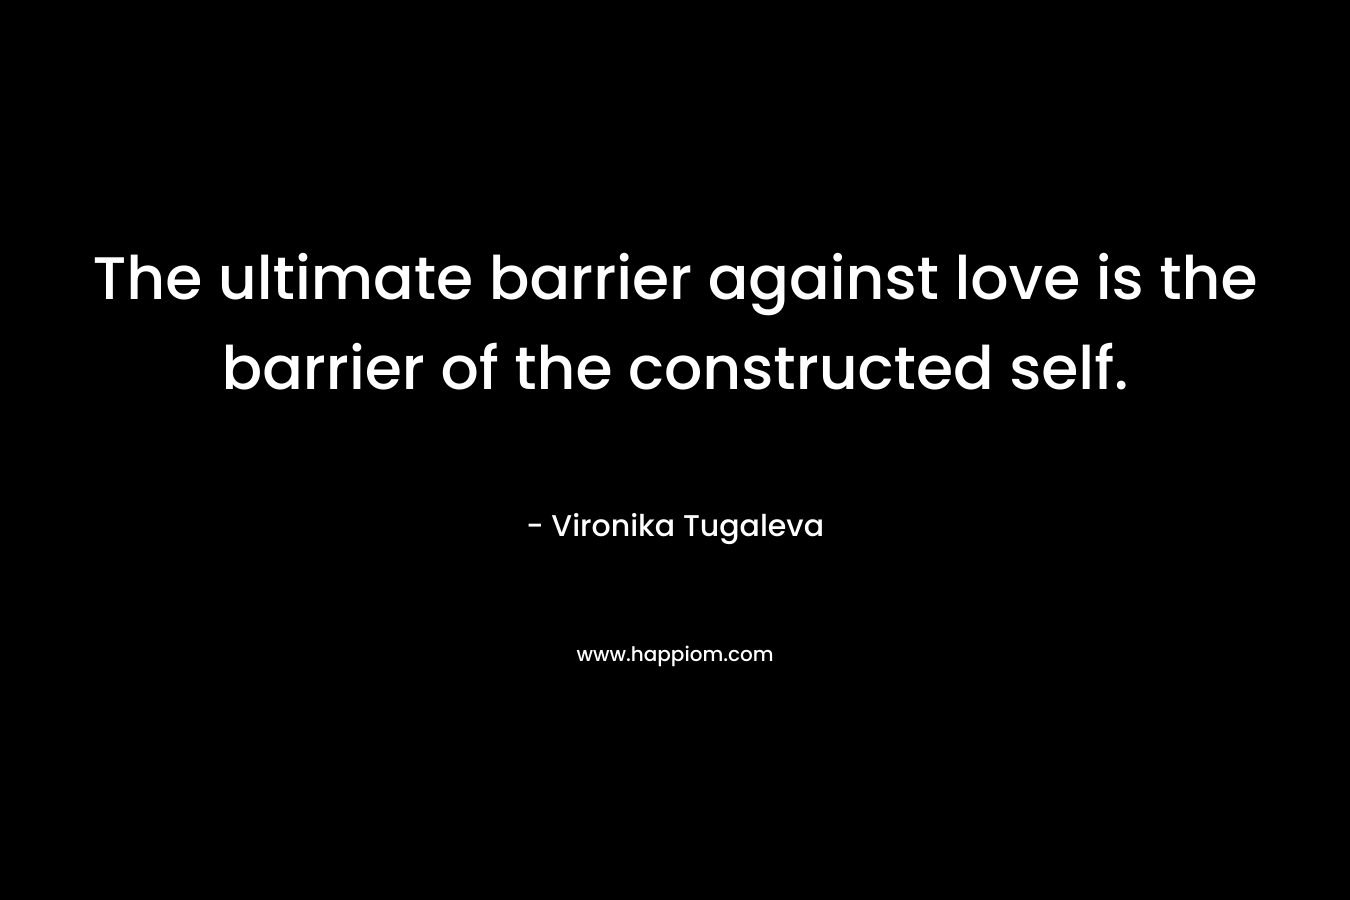 The ultimate barrier against love is the barrier of the constructed self.